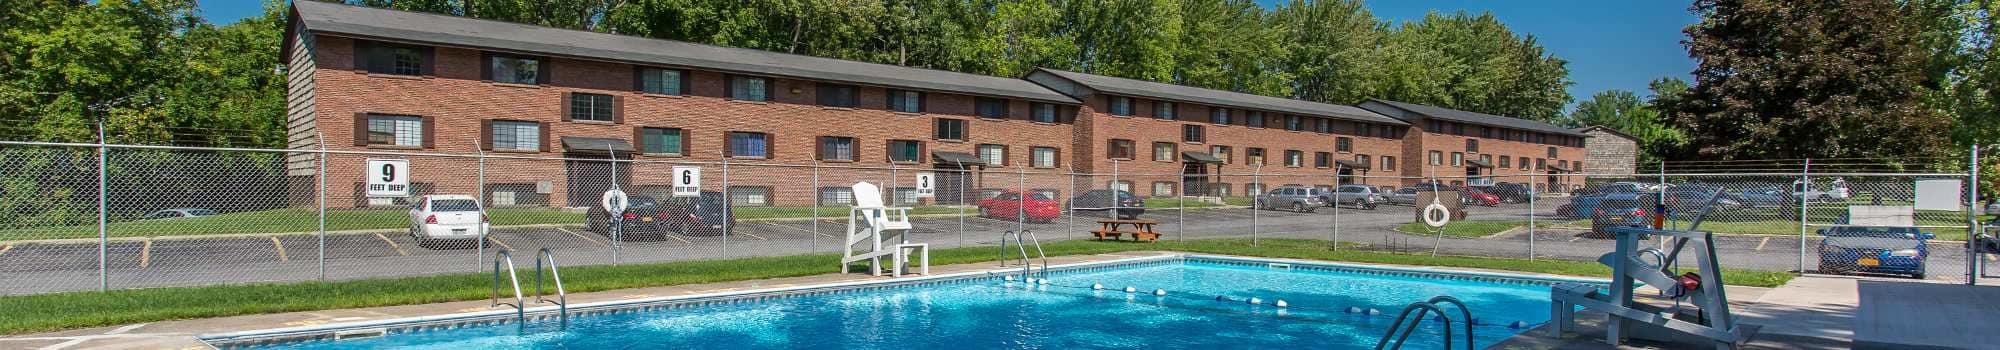 Schedule a tour at The Residences at Covered Bridge in Liverpool, New York